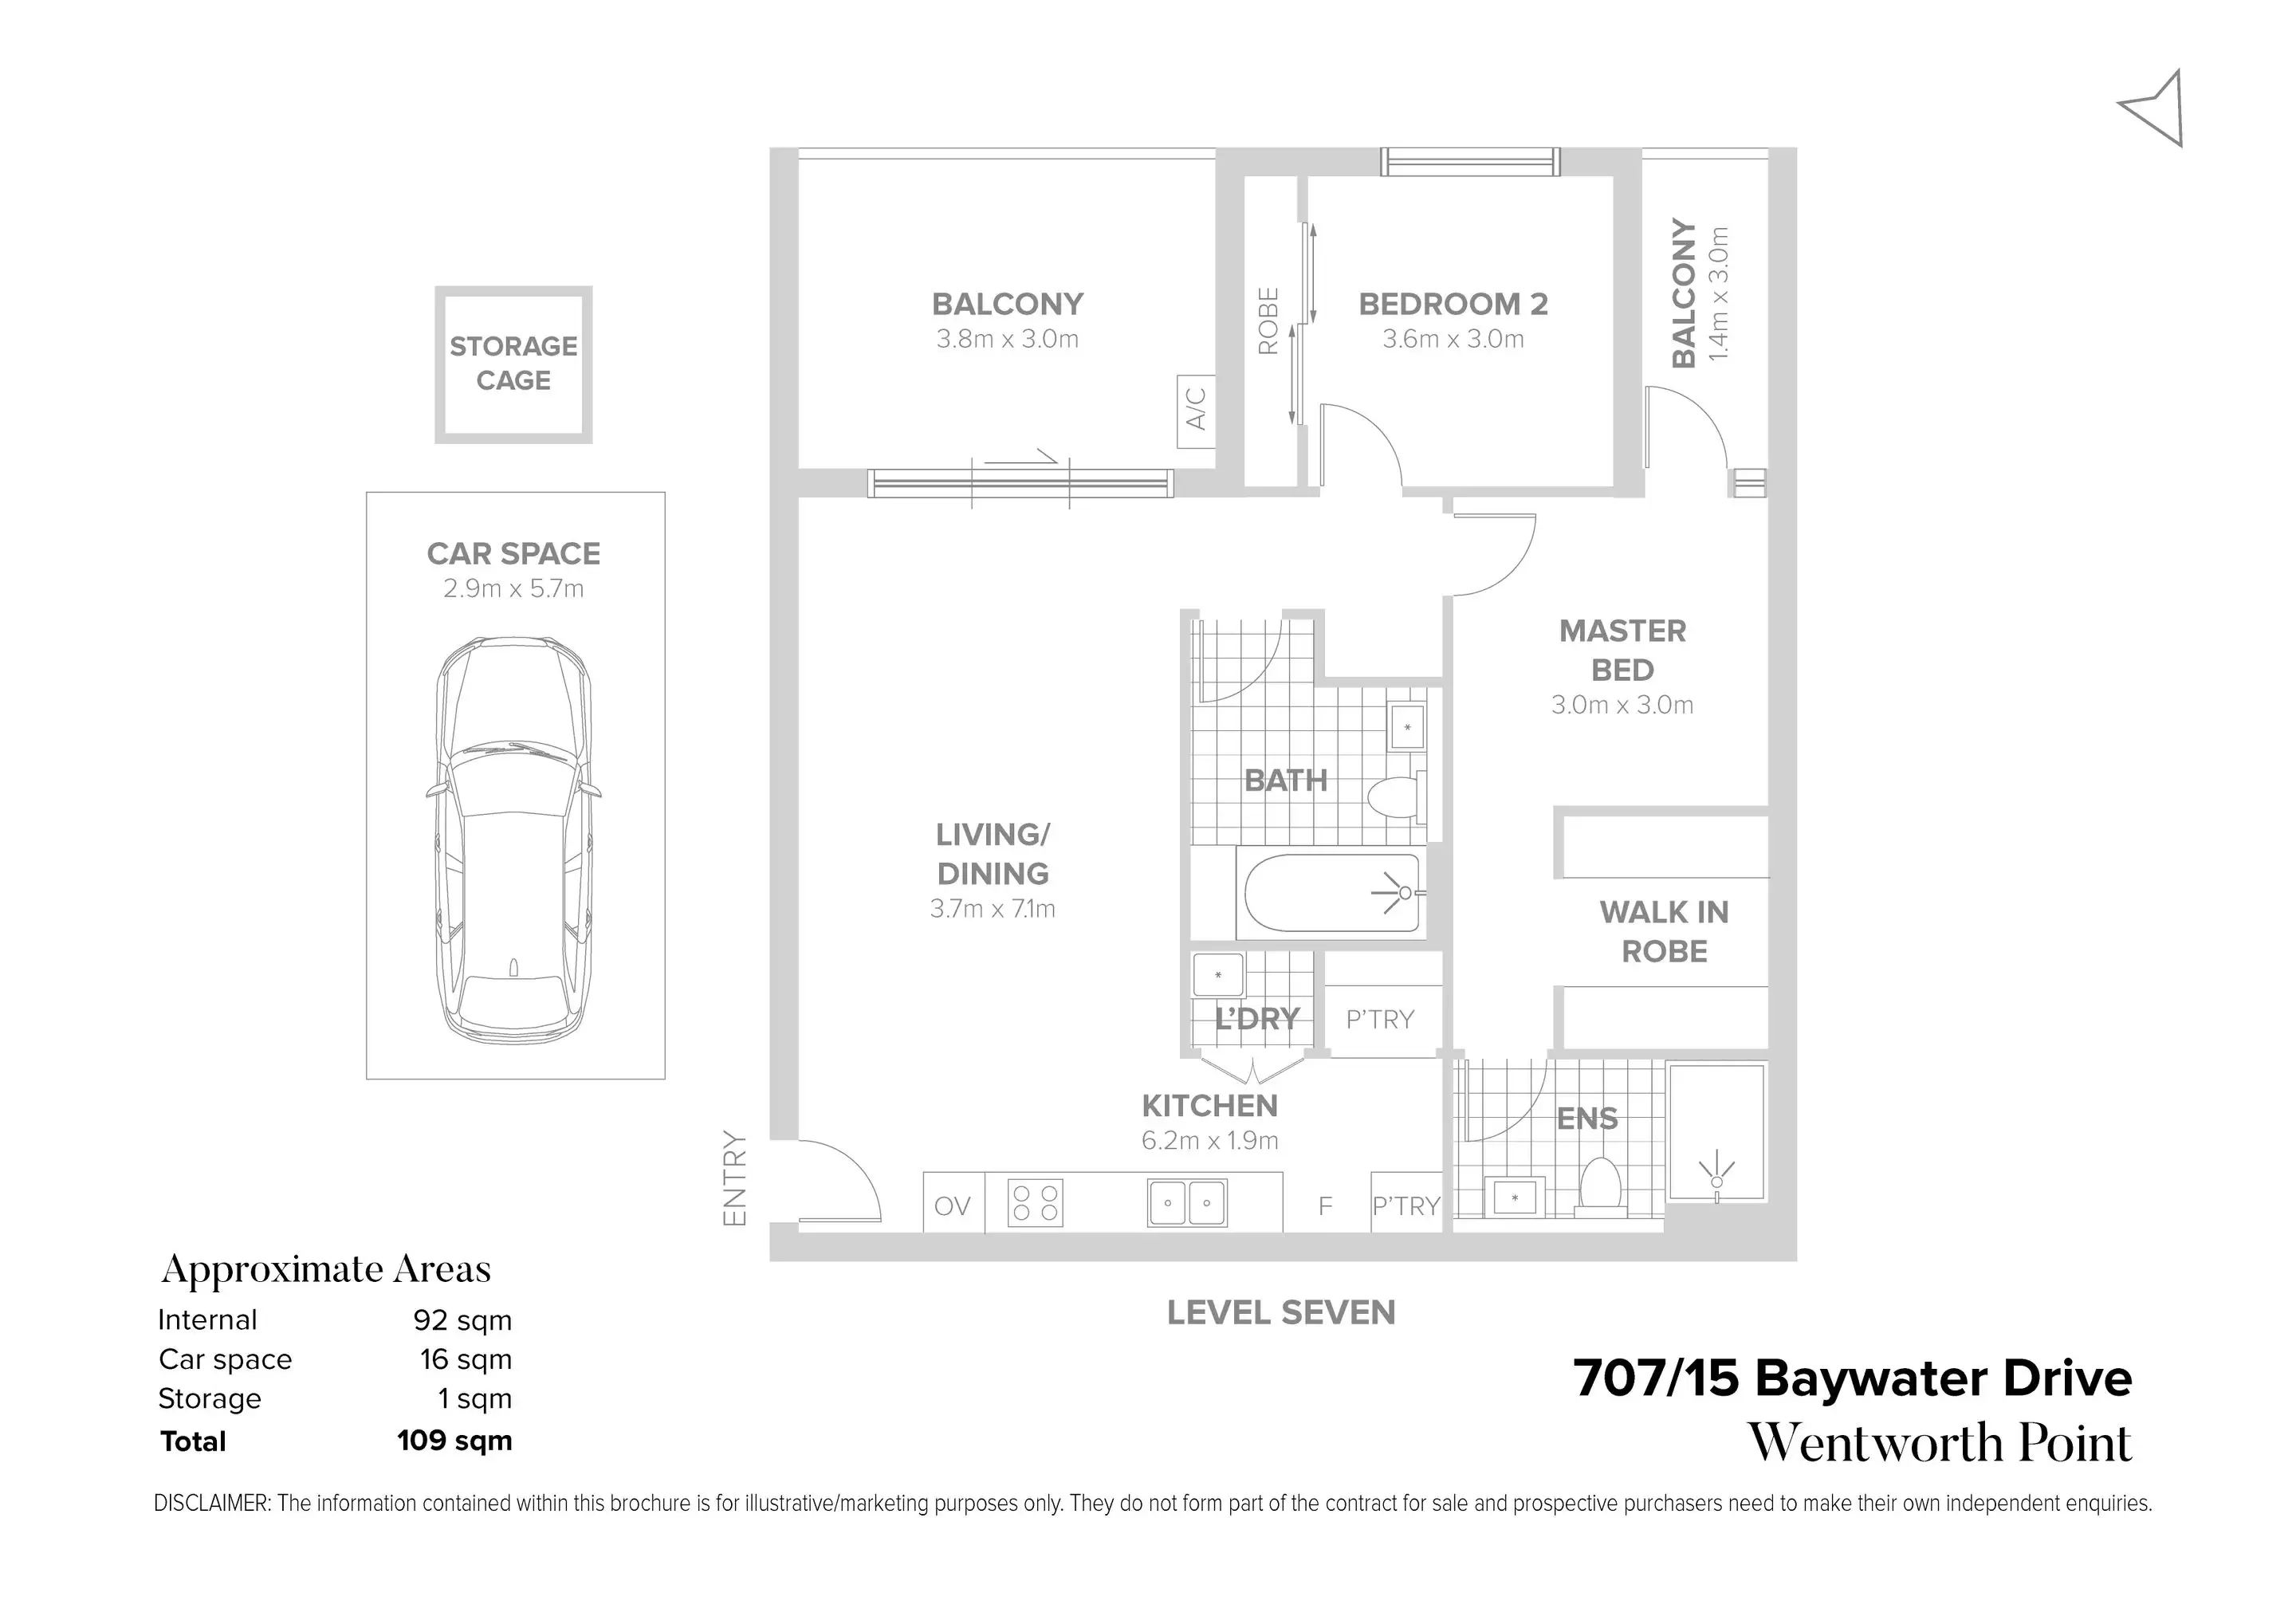 707/15 Baywater Drive, Wentworth Point Sold by Chidiac Realty - floorplan